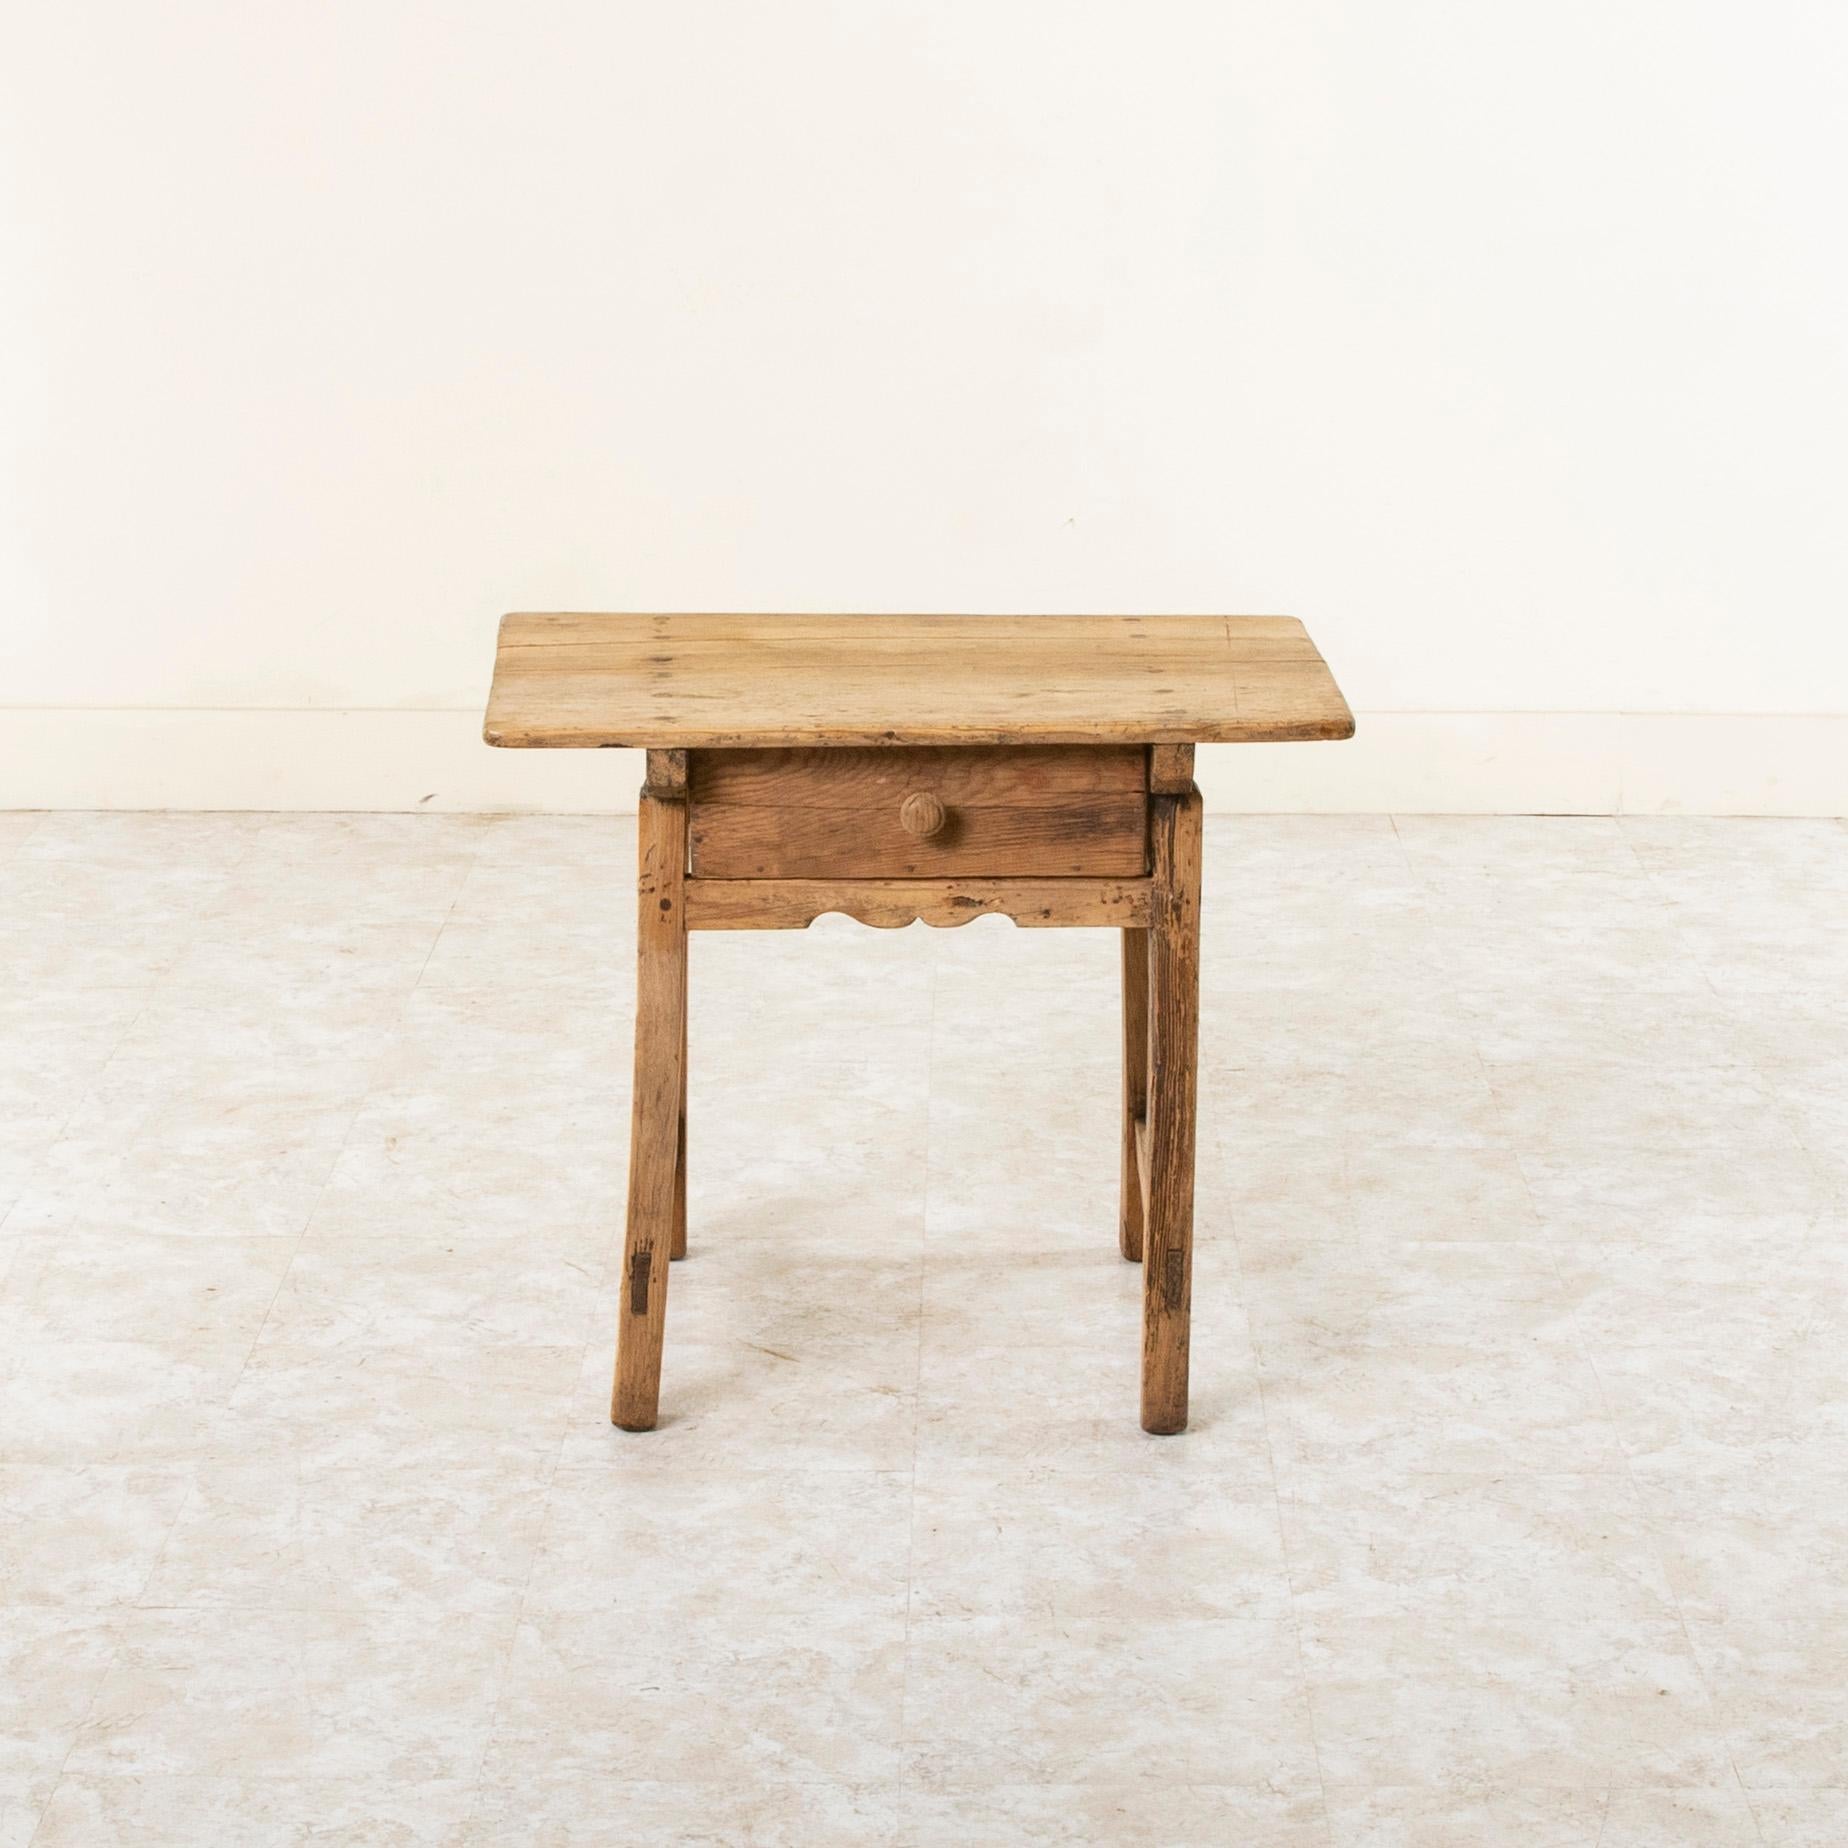 Created by a goat herder in the Pyrenees while tending his sheep, this late nineteenth century Spanish pitch pine mountain table is constructed of hand pegged mortise and tenon joinery. The top is is formed by two planks of wood and is hand pegged